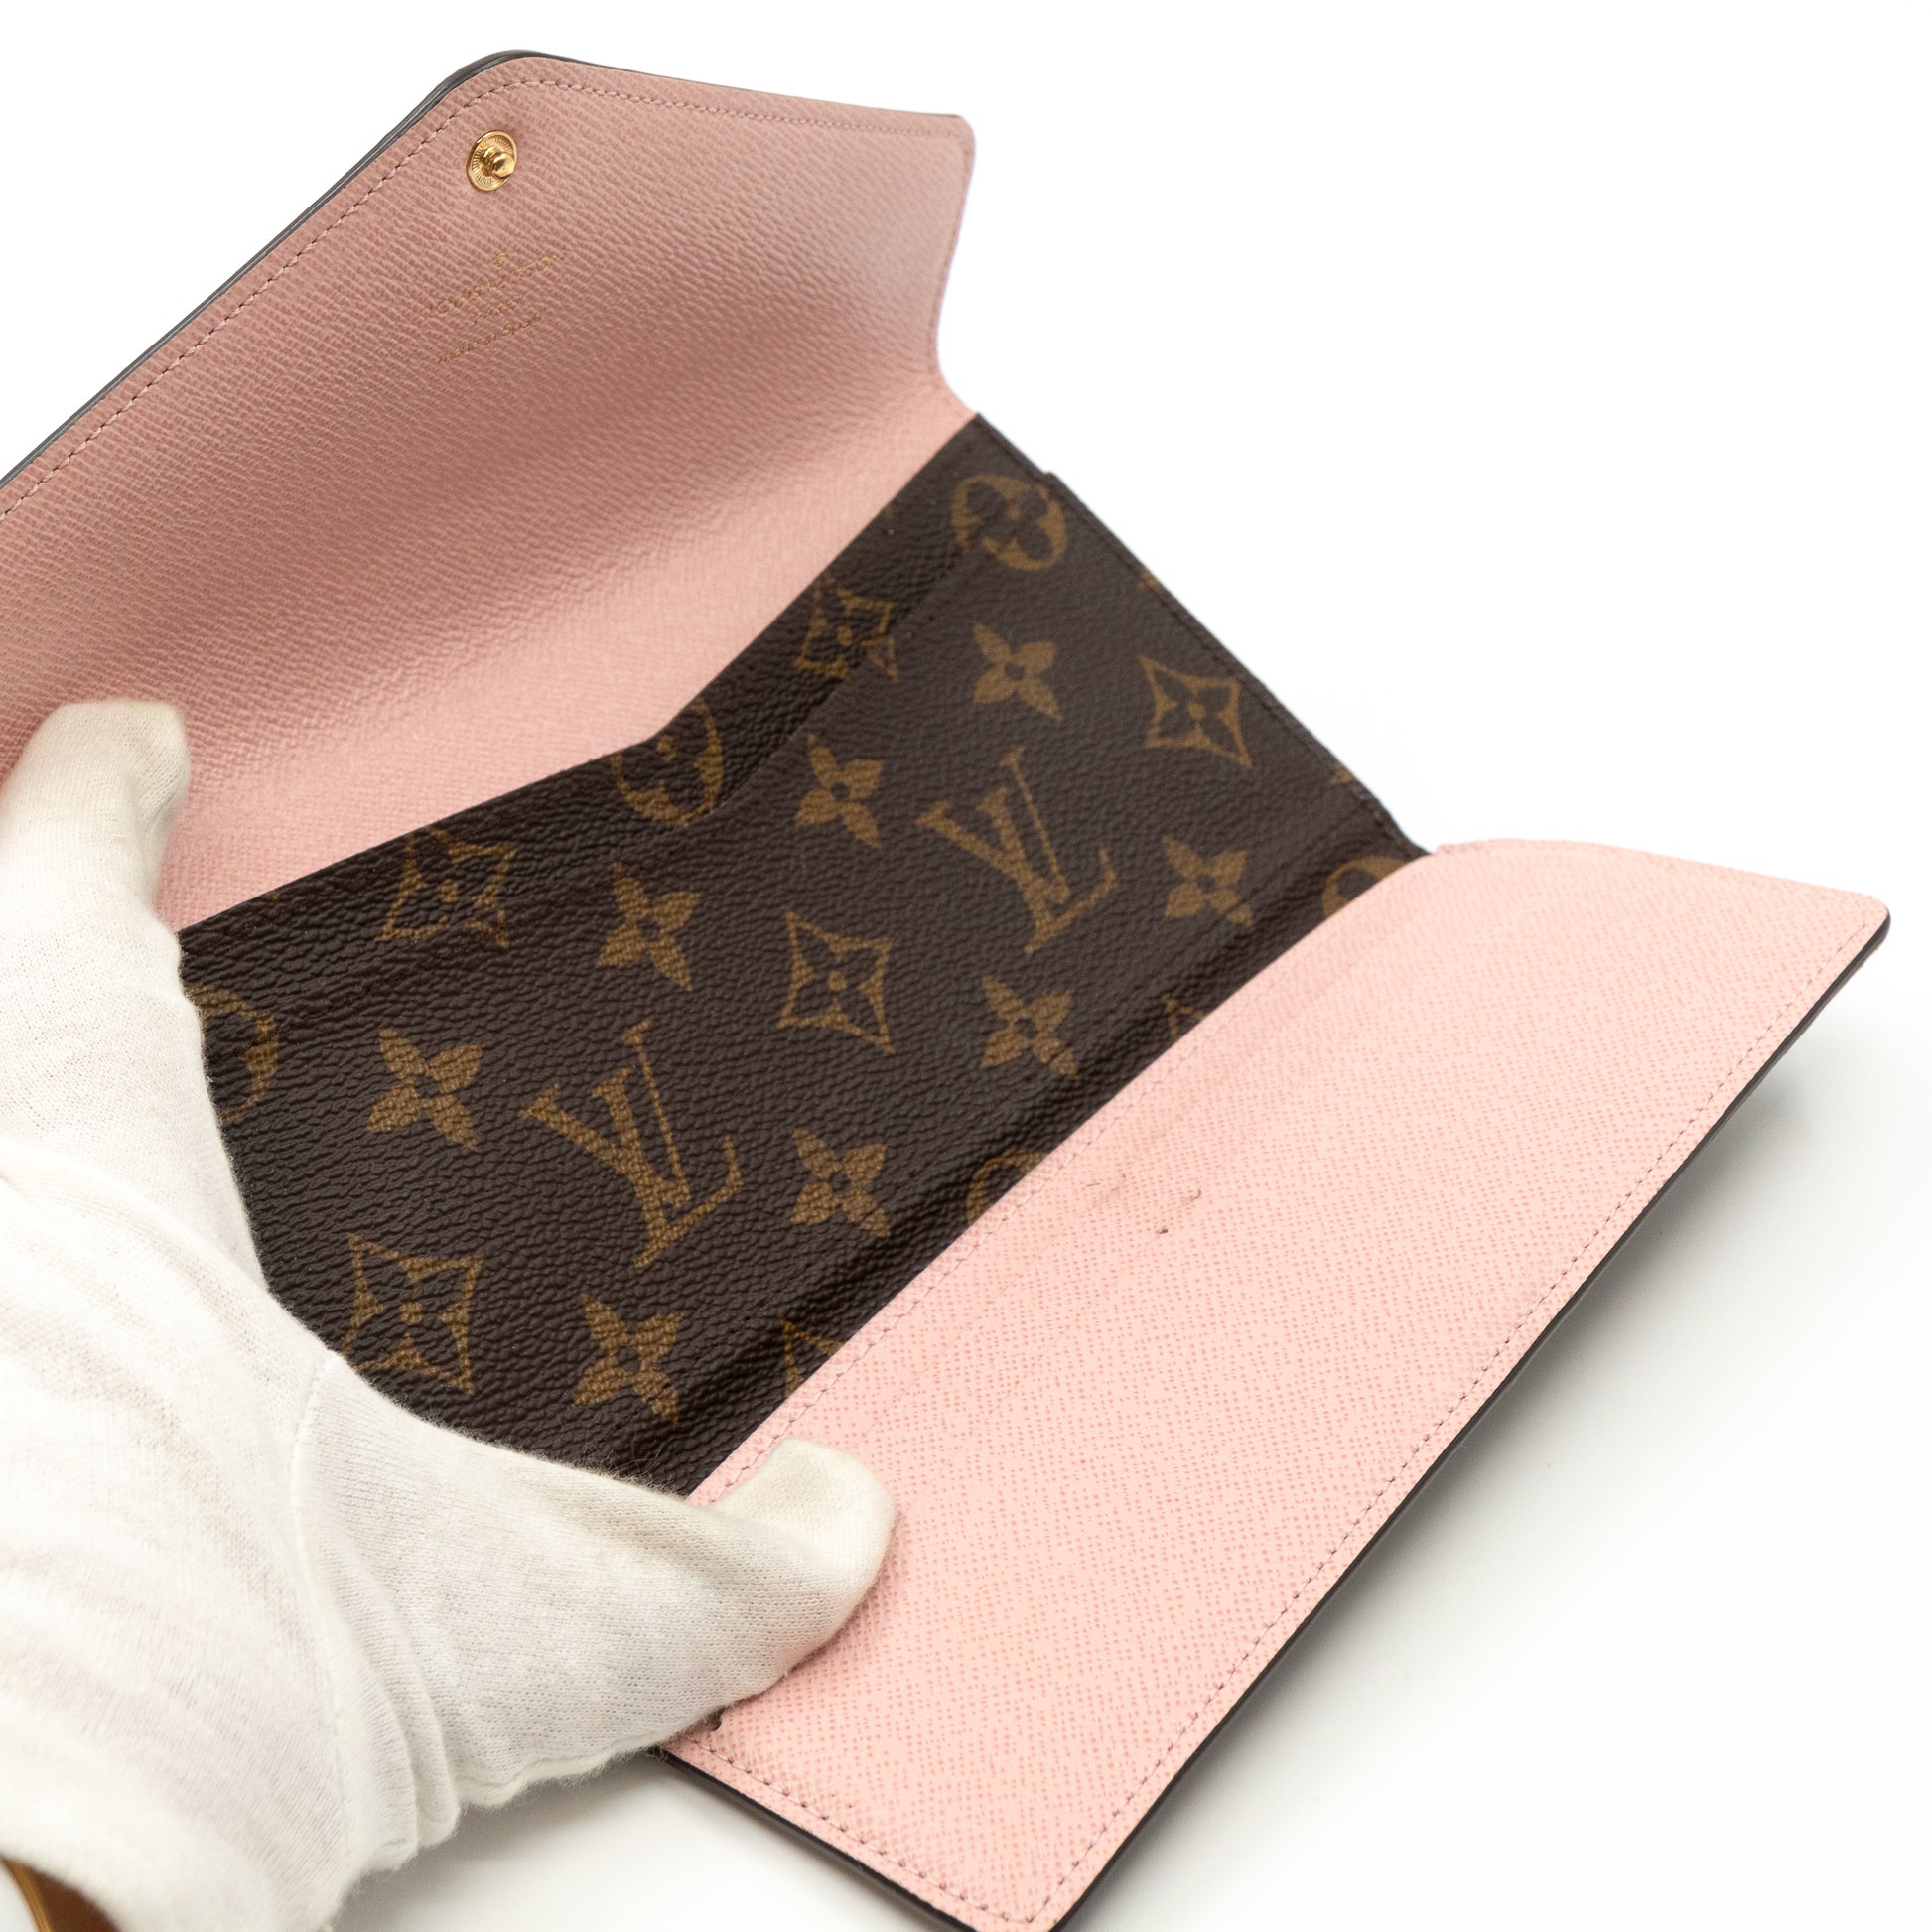 I bought the Joséphine wallet in rose ballerine yesterday (1st LV